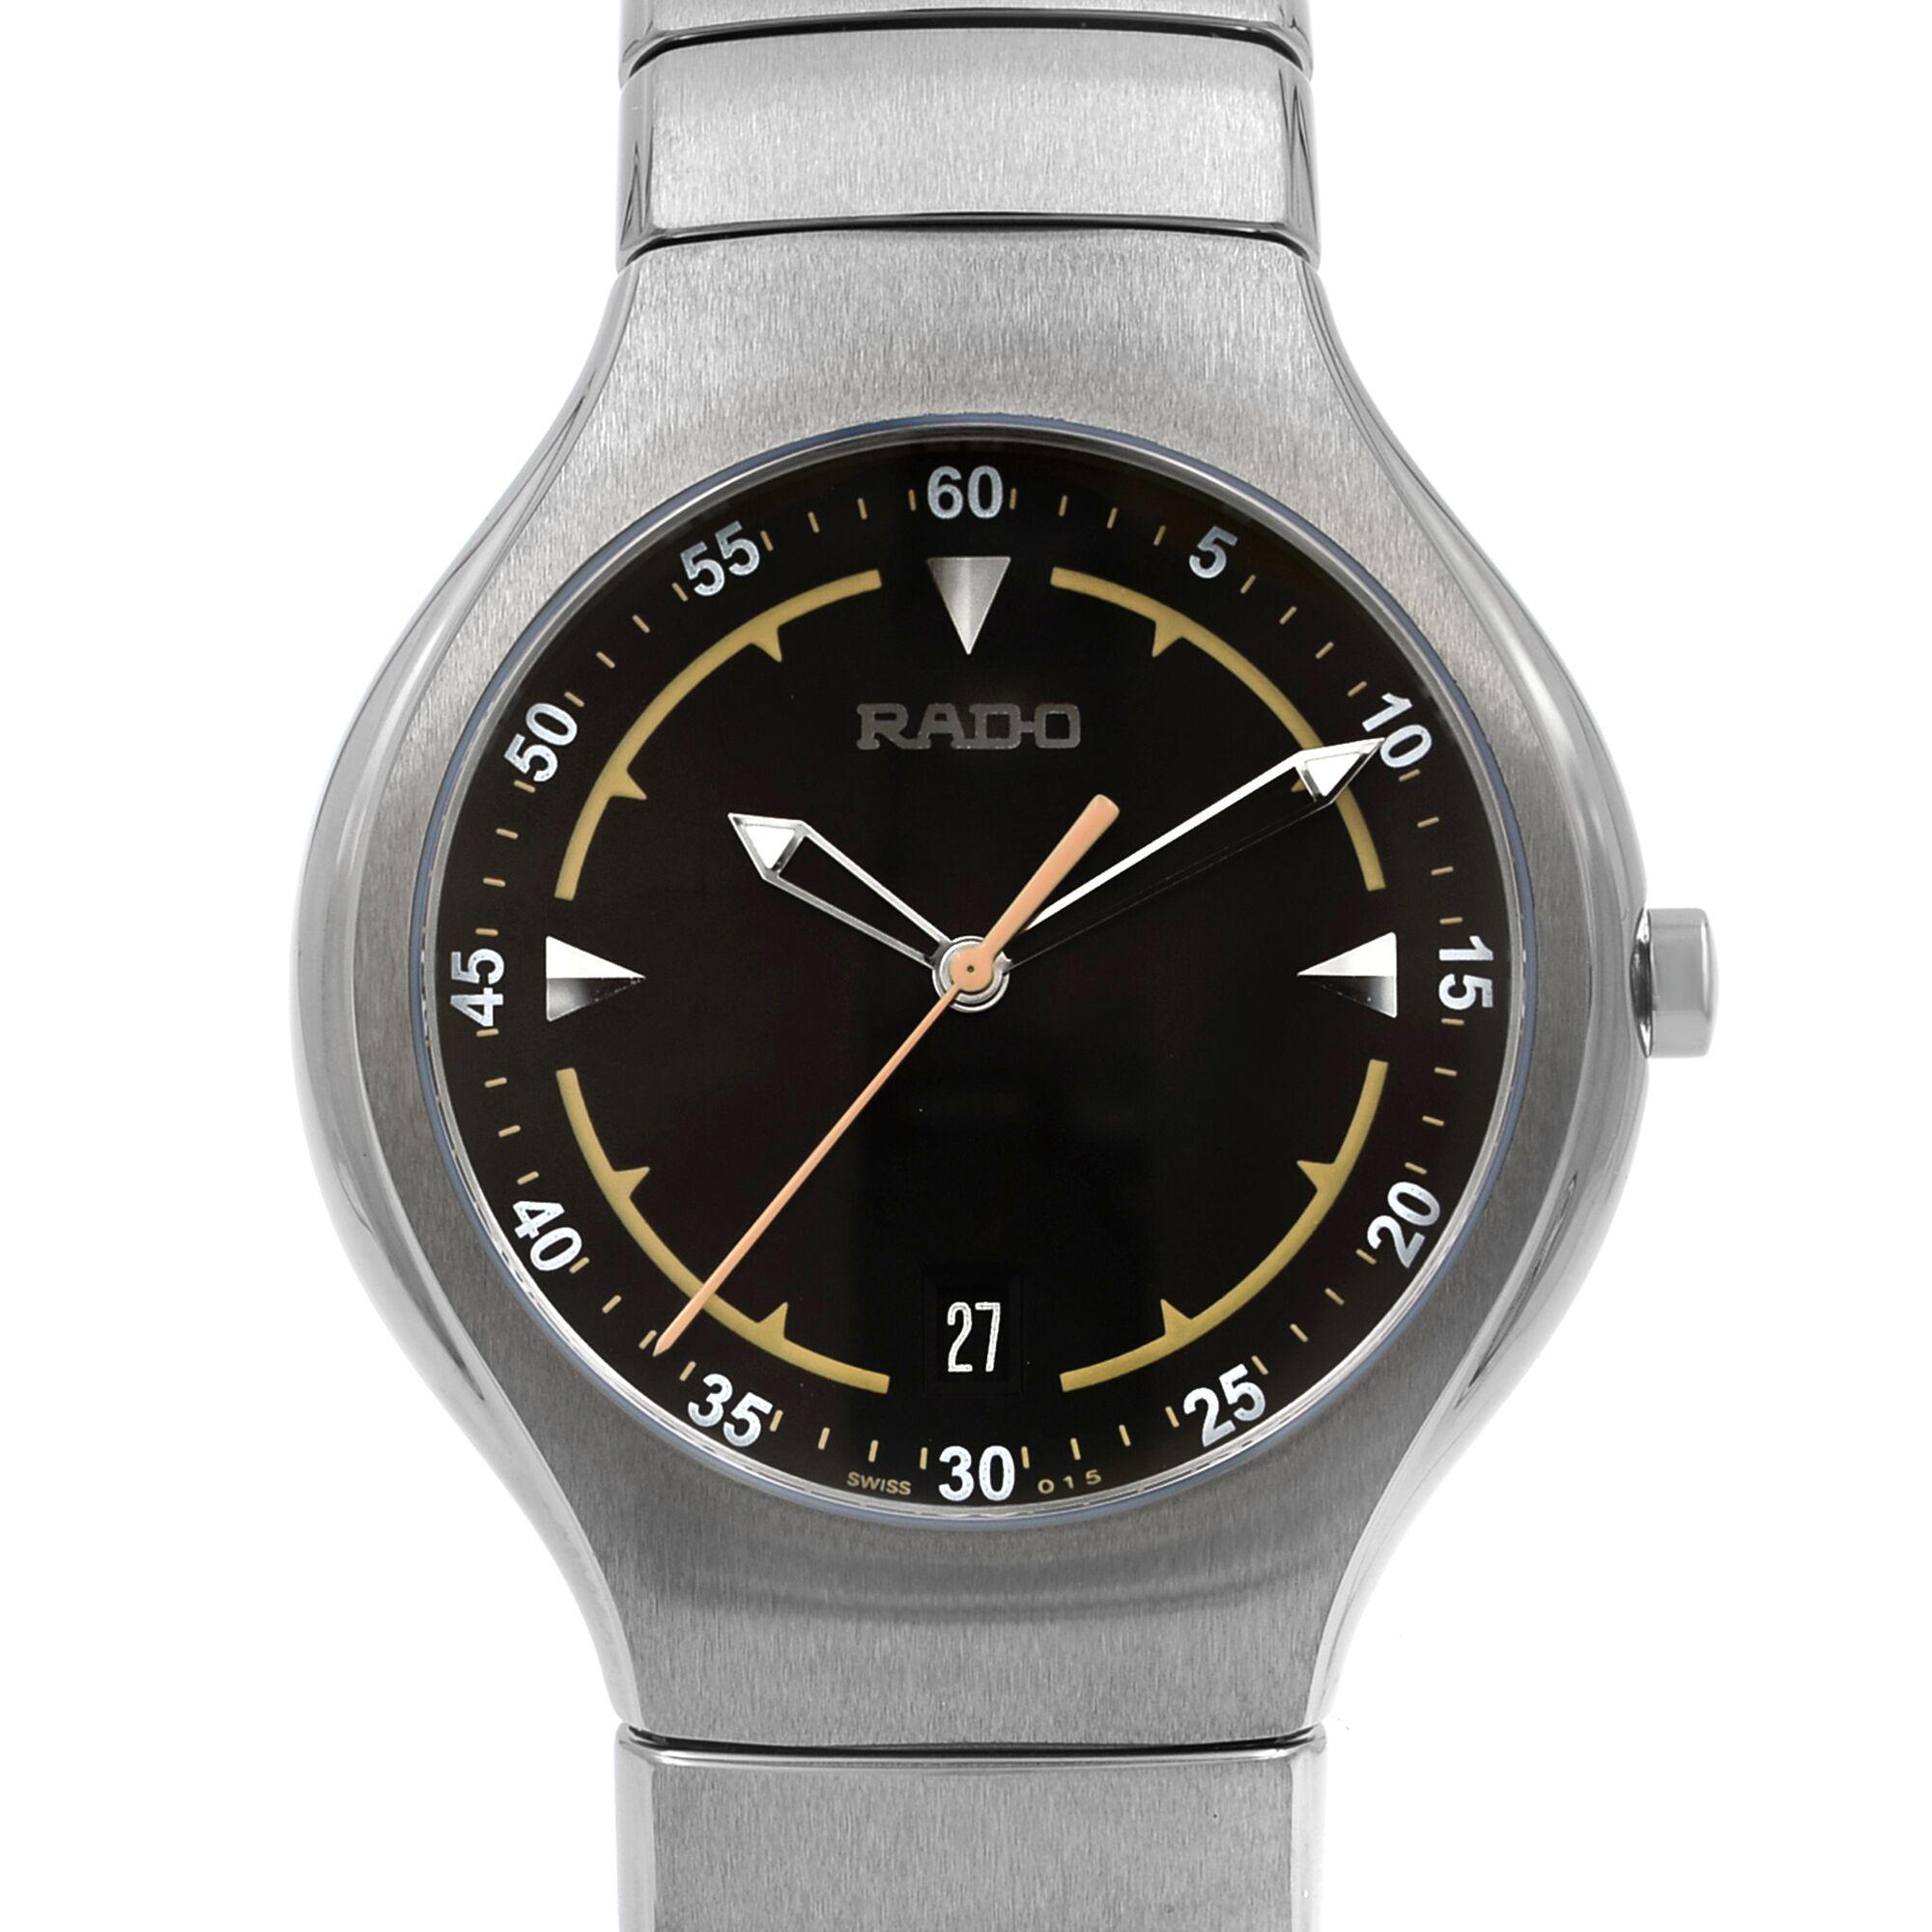 This brand new Rado True R27675152 is a beautiful men's timepiece that is powered by a quartz movement which is cased in a ceramic case. It has a round shape face,  dial and has hand sticks & numerals style markers. It is completed with a ceramic